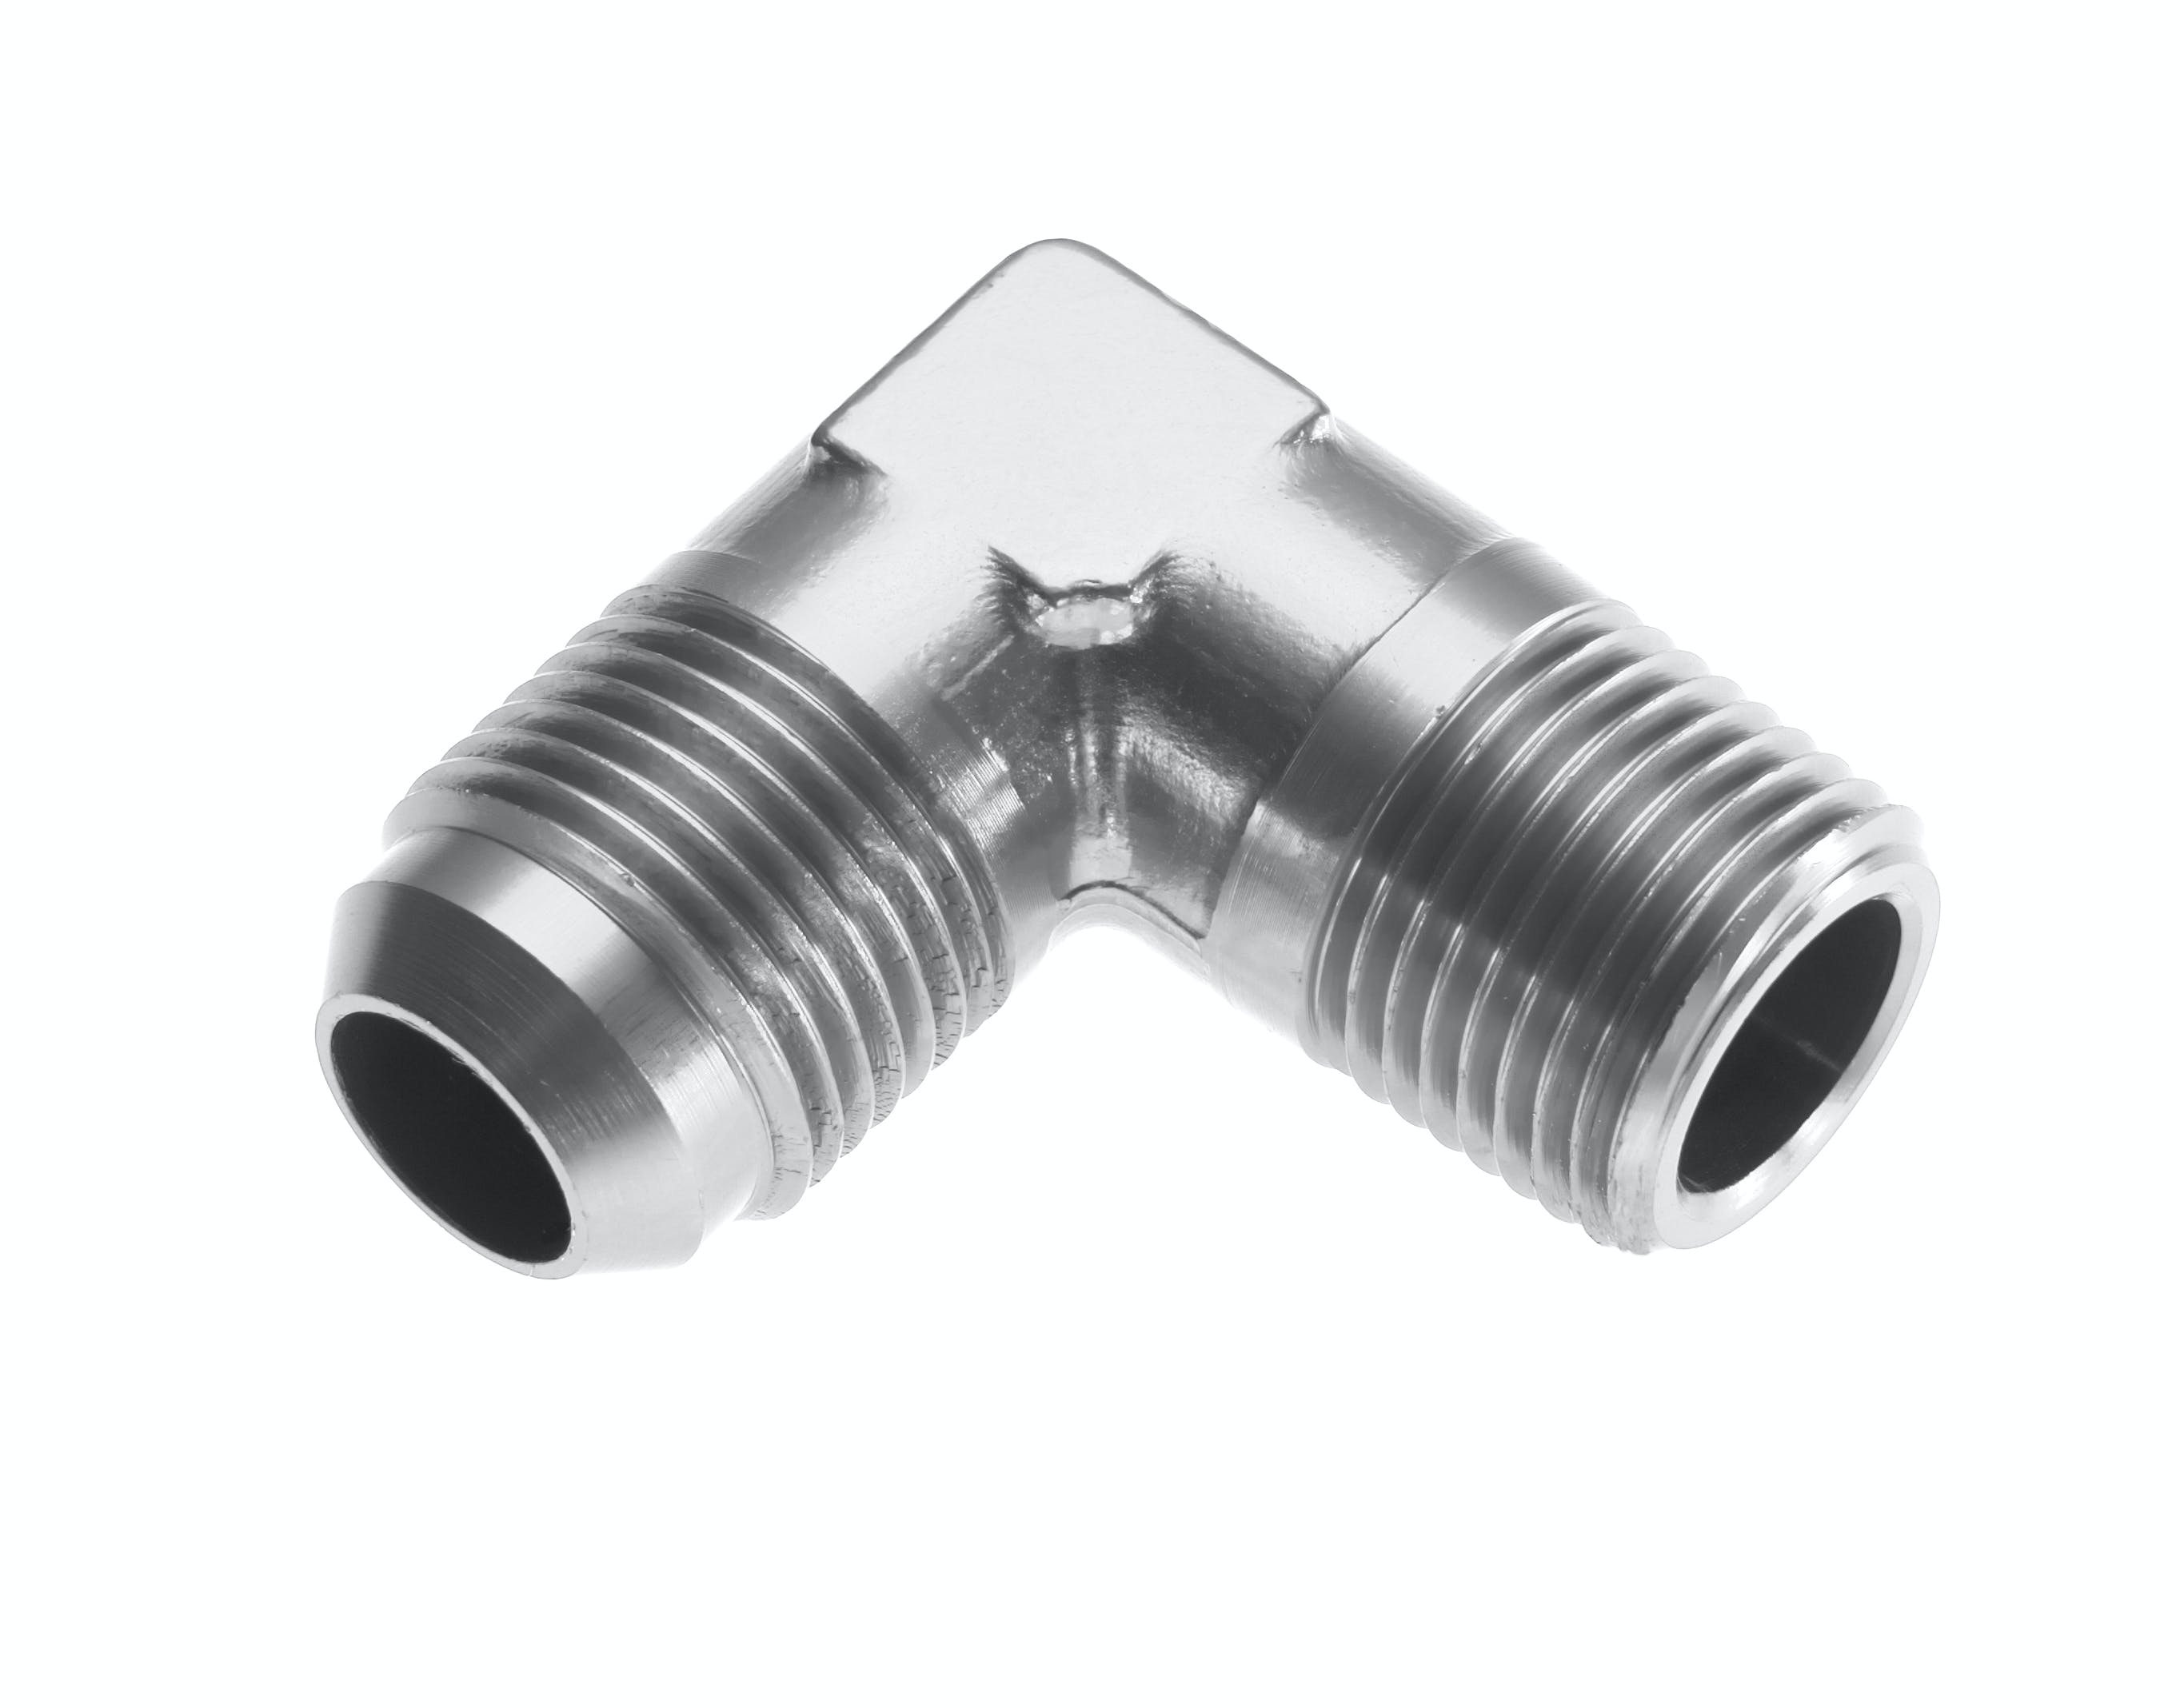 Redhorse Performance 822-10-12-5 -10 90 degree Male adapter to -12 (3/4in) NPT Male - clear